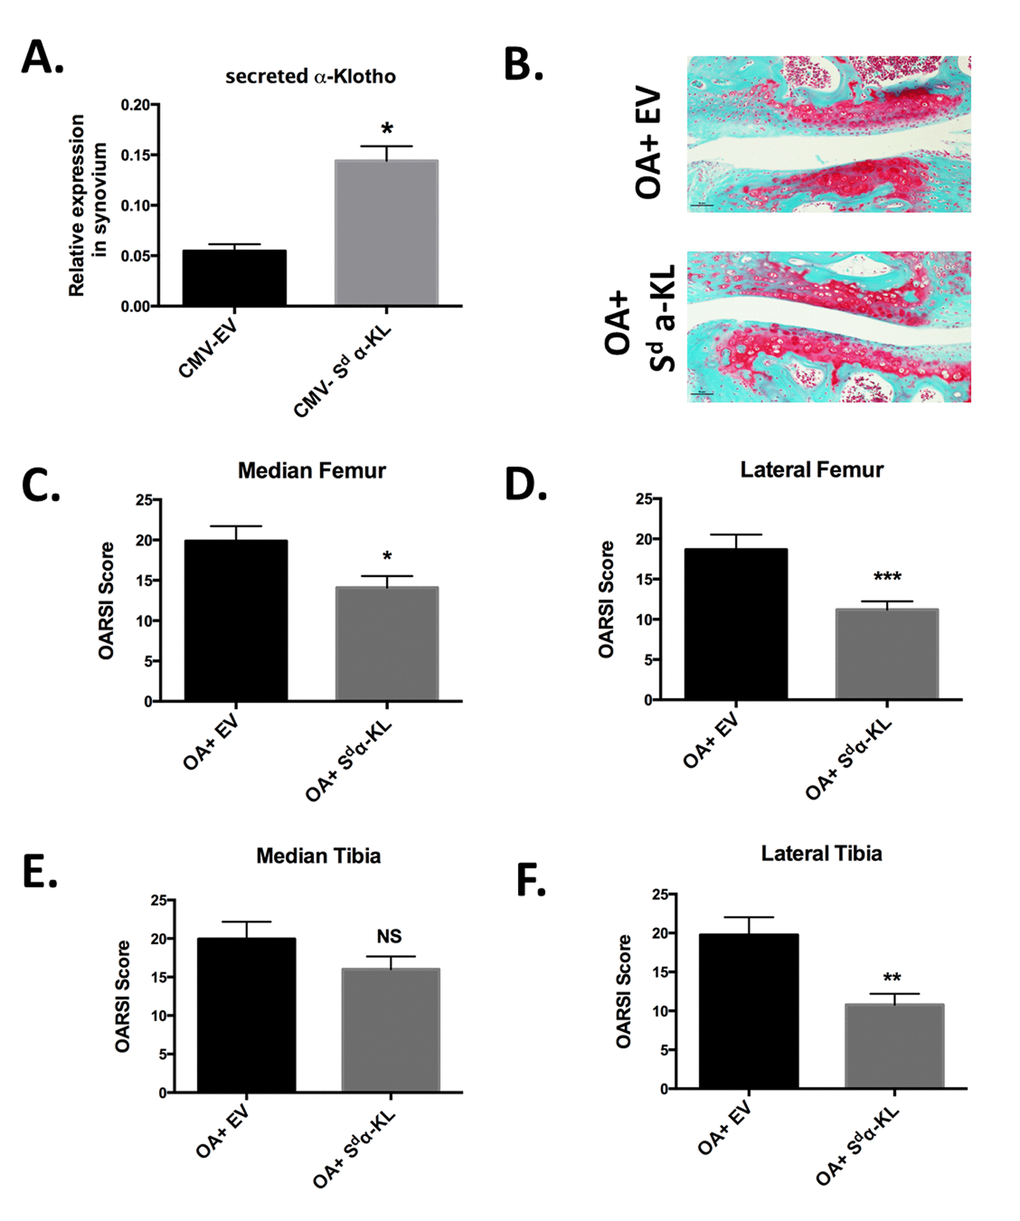 Effect of intra-articular secreted α-KL gene transfer in an experimental murine OA model. (A) Secreted α-KL gene expression in mice synovium after electrotransfer of empty vector (CMV-EV) or CMV-Sd-α-KL expressing vector. (B) Representative Safranin-O Fast-Green staining of knee joints from OA mice treated with empty vector (OA+EV) or CMV-Sd-α-KL expressing vector (OA+Sd-α-KL). (C-F) OARSI scores in the different joint localizations from OA mice after intra-articular electrotransfer of empty vector (OA+EV; n=15) or CMV-Sd-α-KL expressing vector (OA+Sd-α-KL; n=25). Data are represented as mean -/+ SEM. *=p